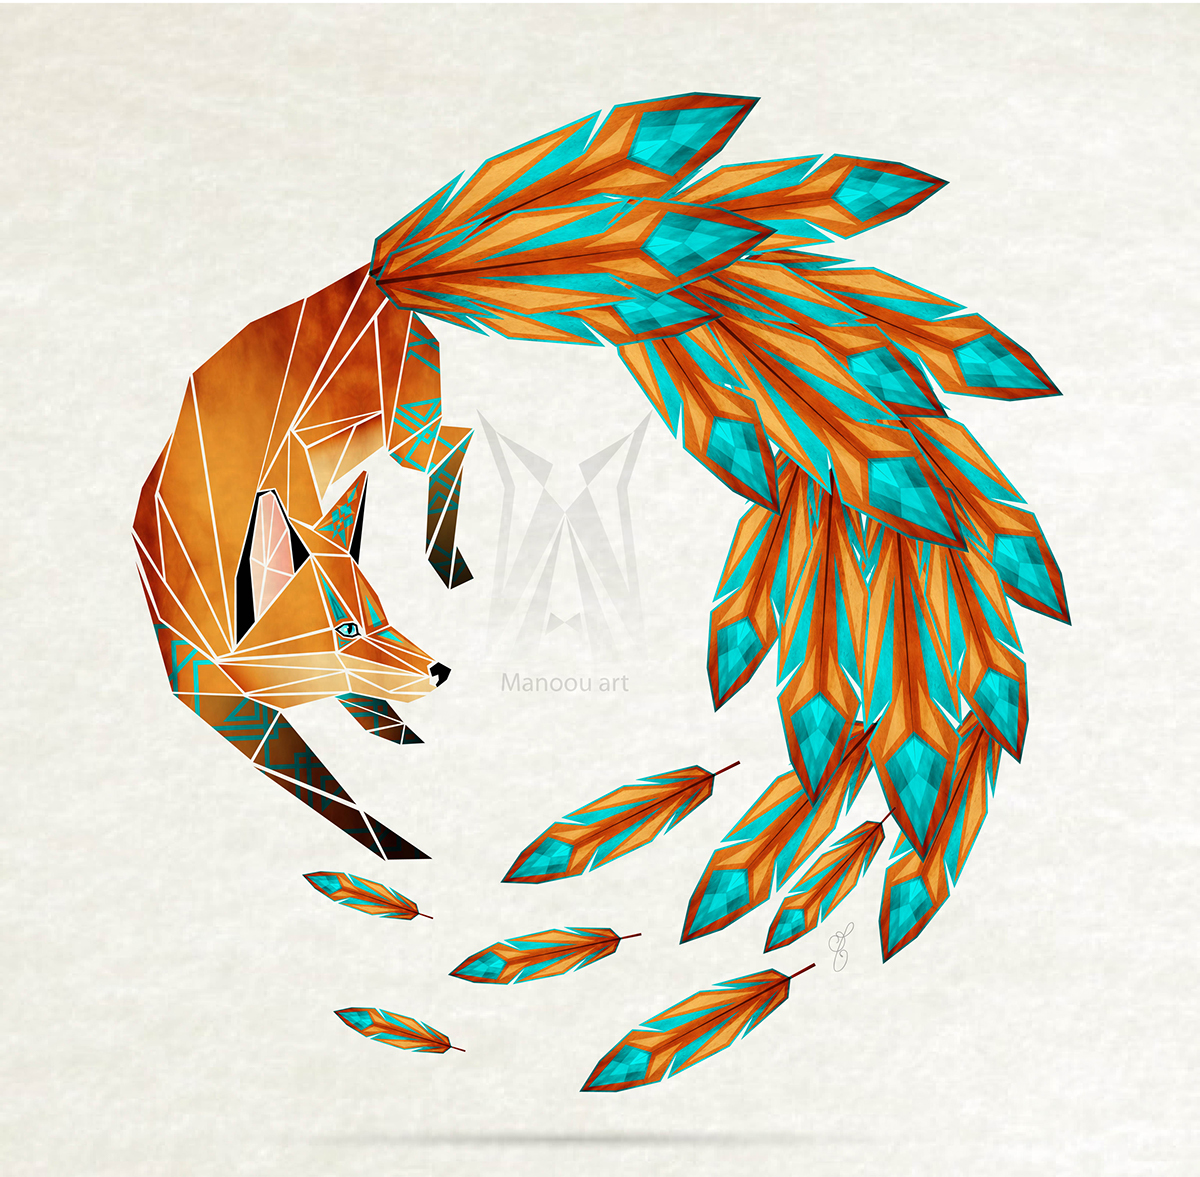 FOX foxes animal geometric shape triangle tail feather feathers abstract fantasy cercle imagination renard clock